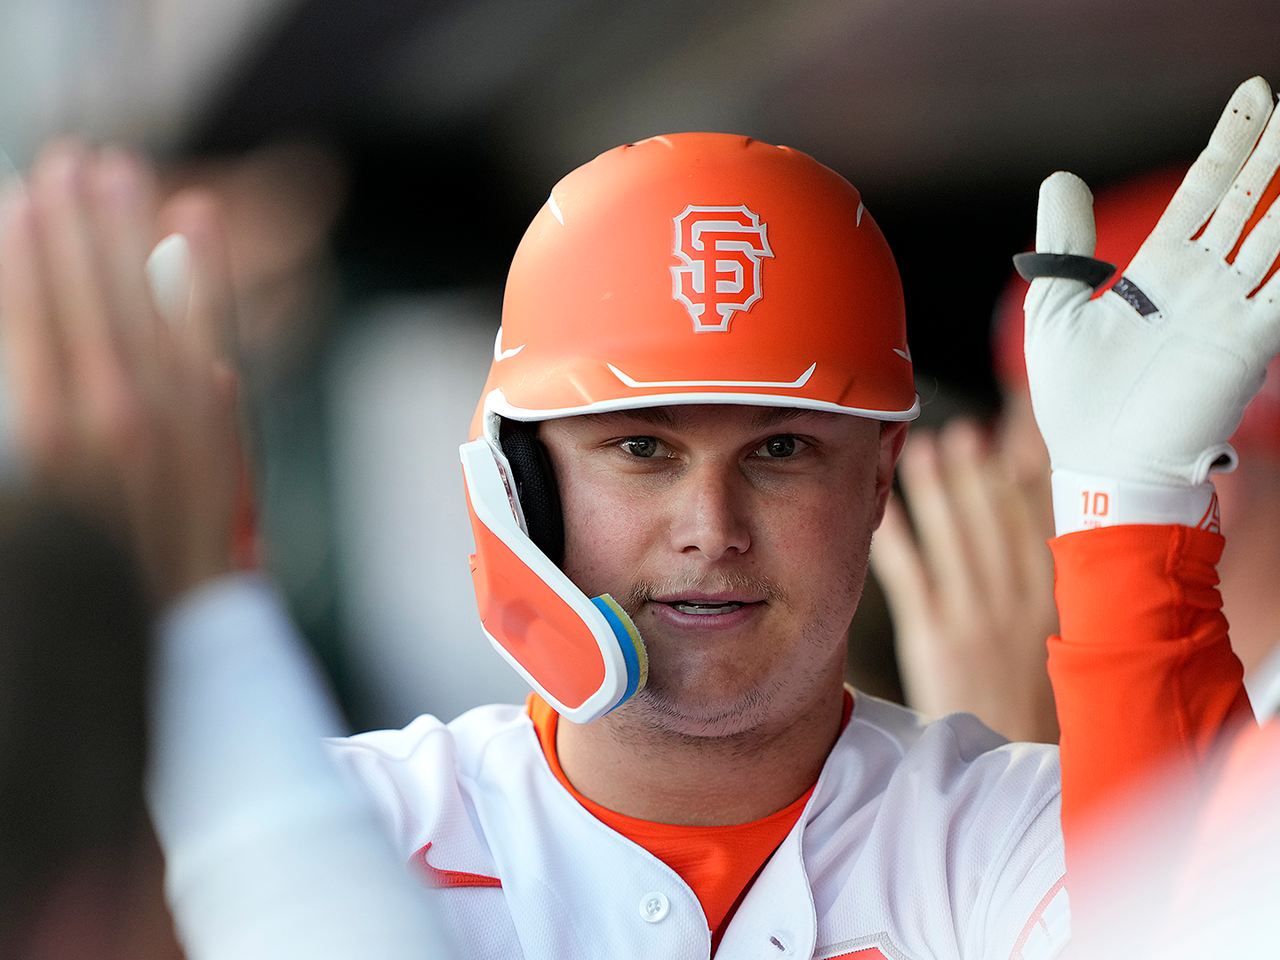 SF Giants: How Barry Bonds played a role in Joc Pederson's 3 HR game